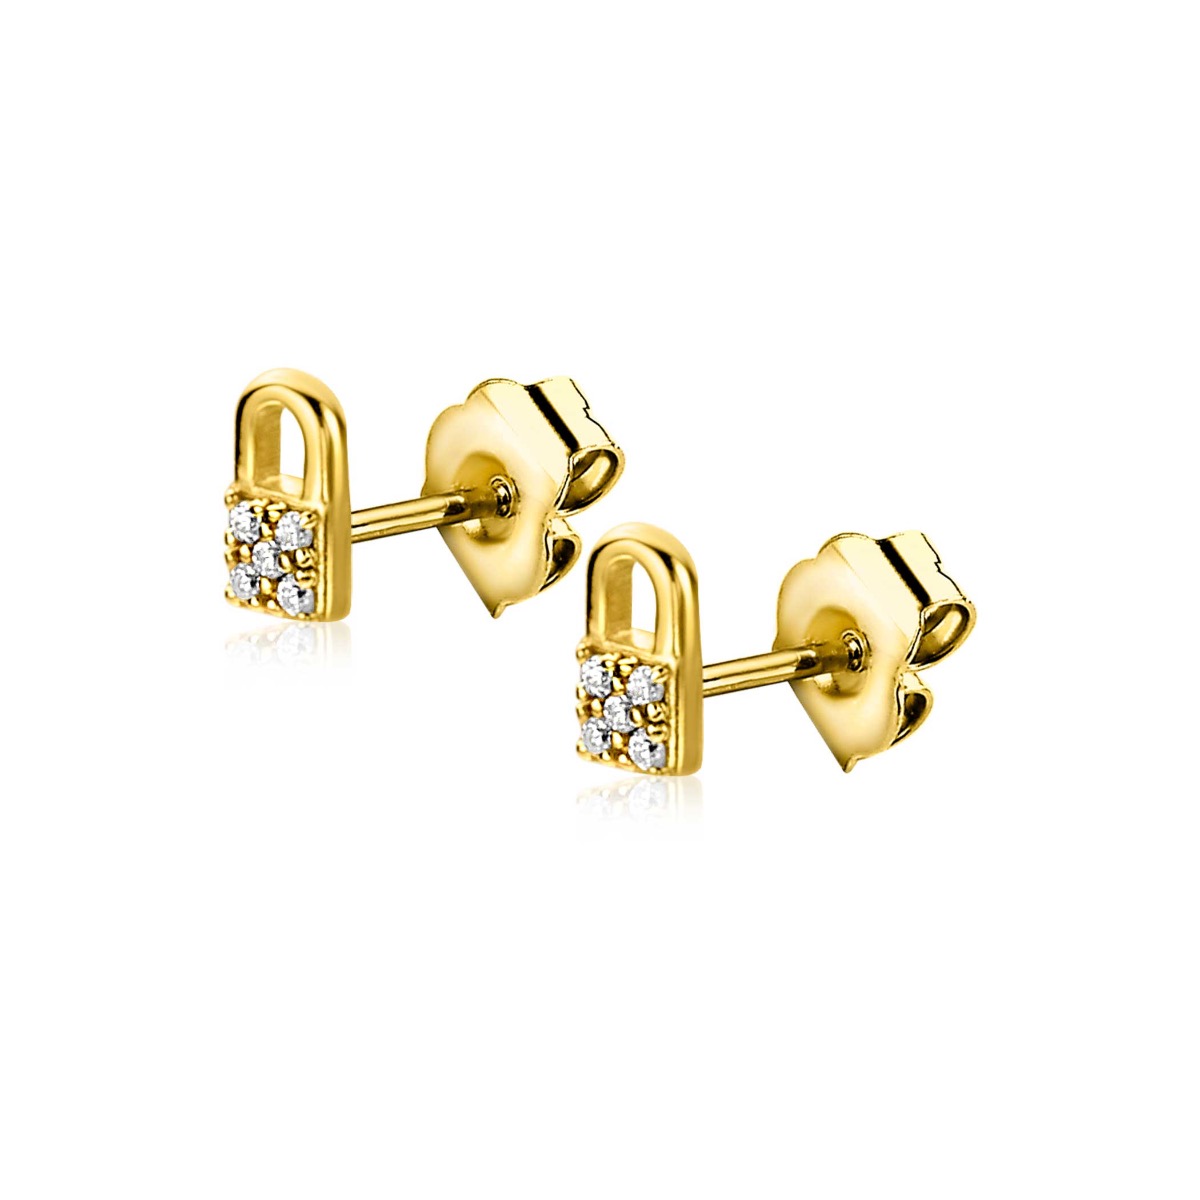 6mm ZINZI Gold Plated Sterling Silver Stud Earrings Lock with White Zirconia ZIO2301